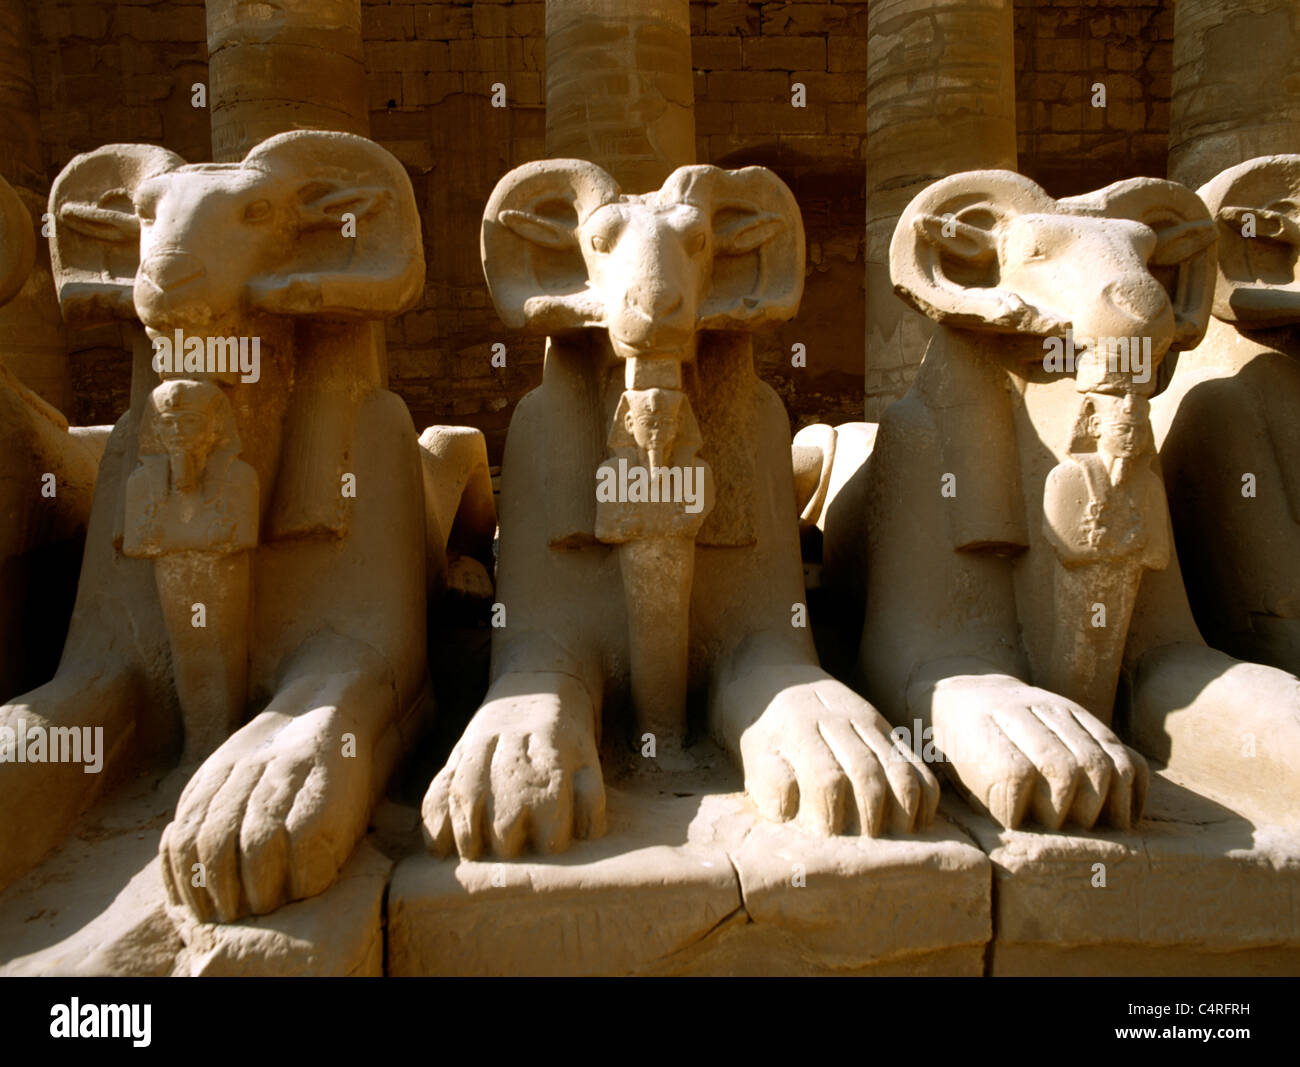 Karnak Temple Complex Egypt  Avenue of Ram-Headed Sphinxes the Ram Symbolizing Egyptian God Amun Protecting the Royal Effigies of Rameses II in the form of Osiris Stock Photo